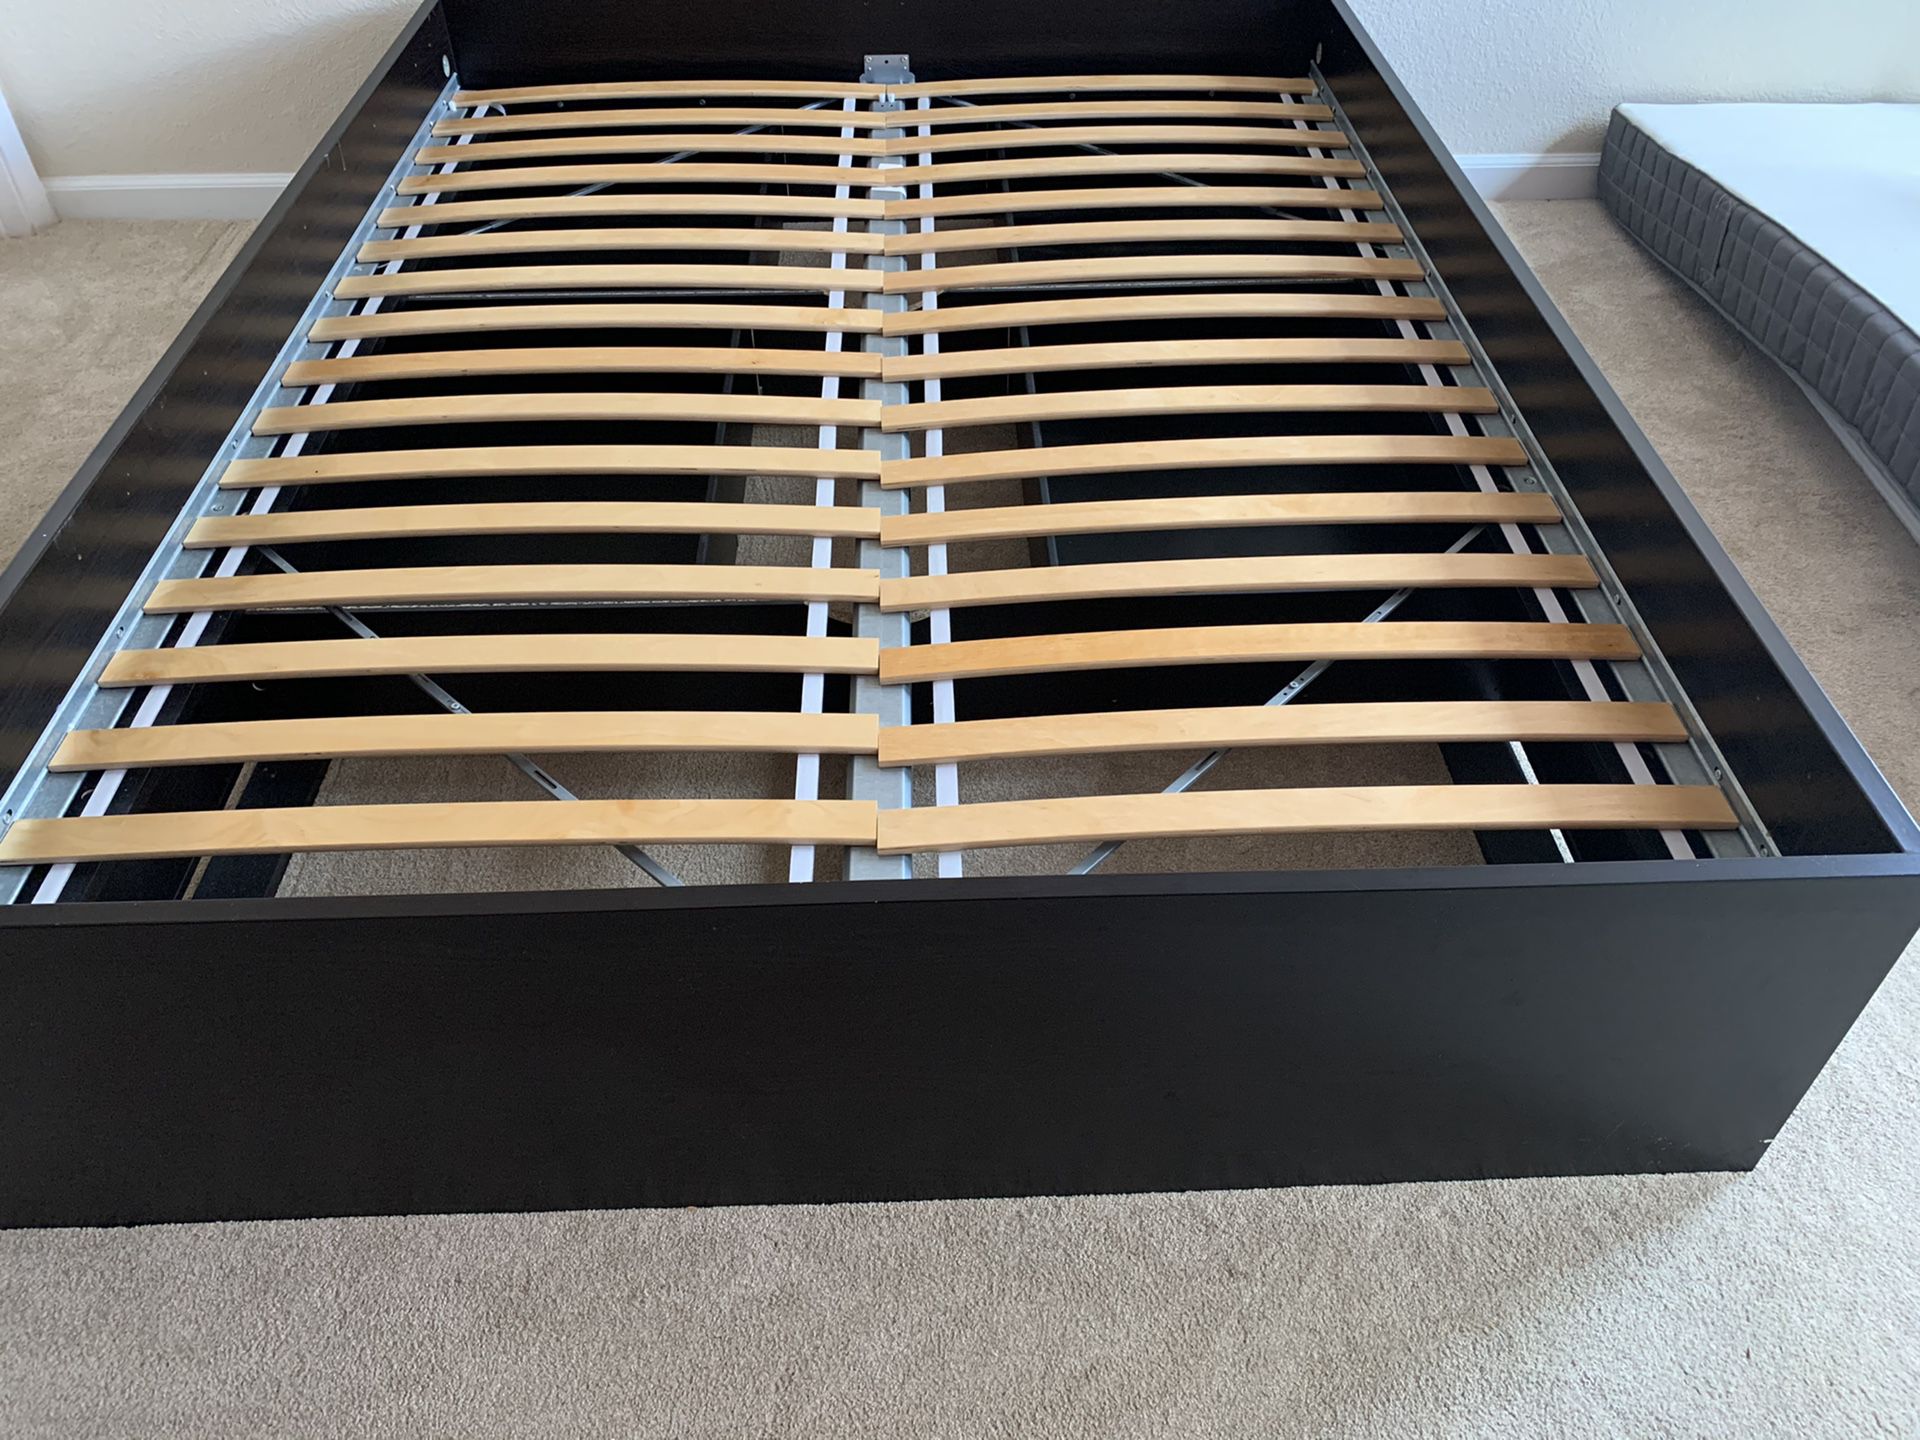 IKEA- Bed frame with storage & morgedal mattress - queen